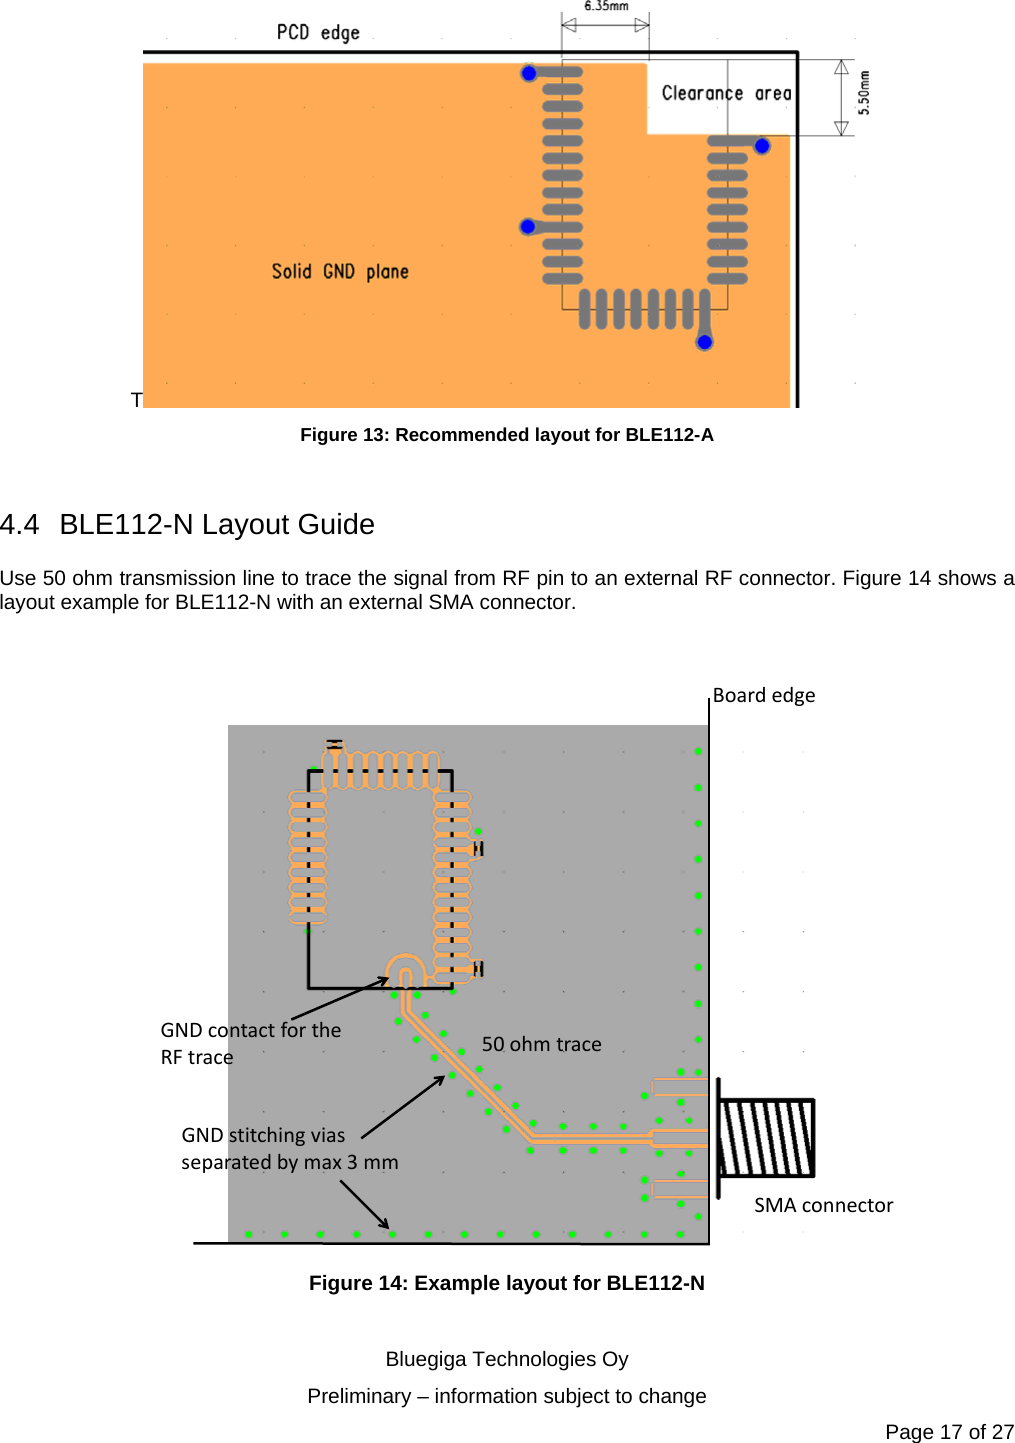   Bluegiga Technologies Oy Preliminary – information subject to change Page 17 of 27 T Figure 13: Recommended layout for BLE112-A  4.4 BLE112-N Layout Guide Use 50 ohm transmission line to trace the signal from RF pin to an external RF connector. Figure 14 shows a layout example for BLE112-N with an external SMA connector.    BoardedgeSMAconnector50ohmtraceGNDcontactfortheRFtraceGNDstitchingviasseparatedbymax3mm Figure 14: Example layout for BLE112-N  